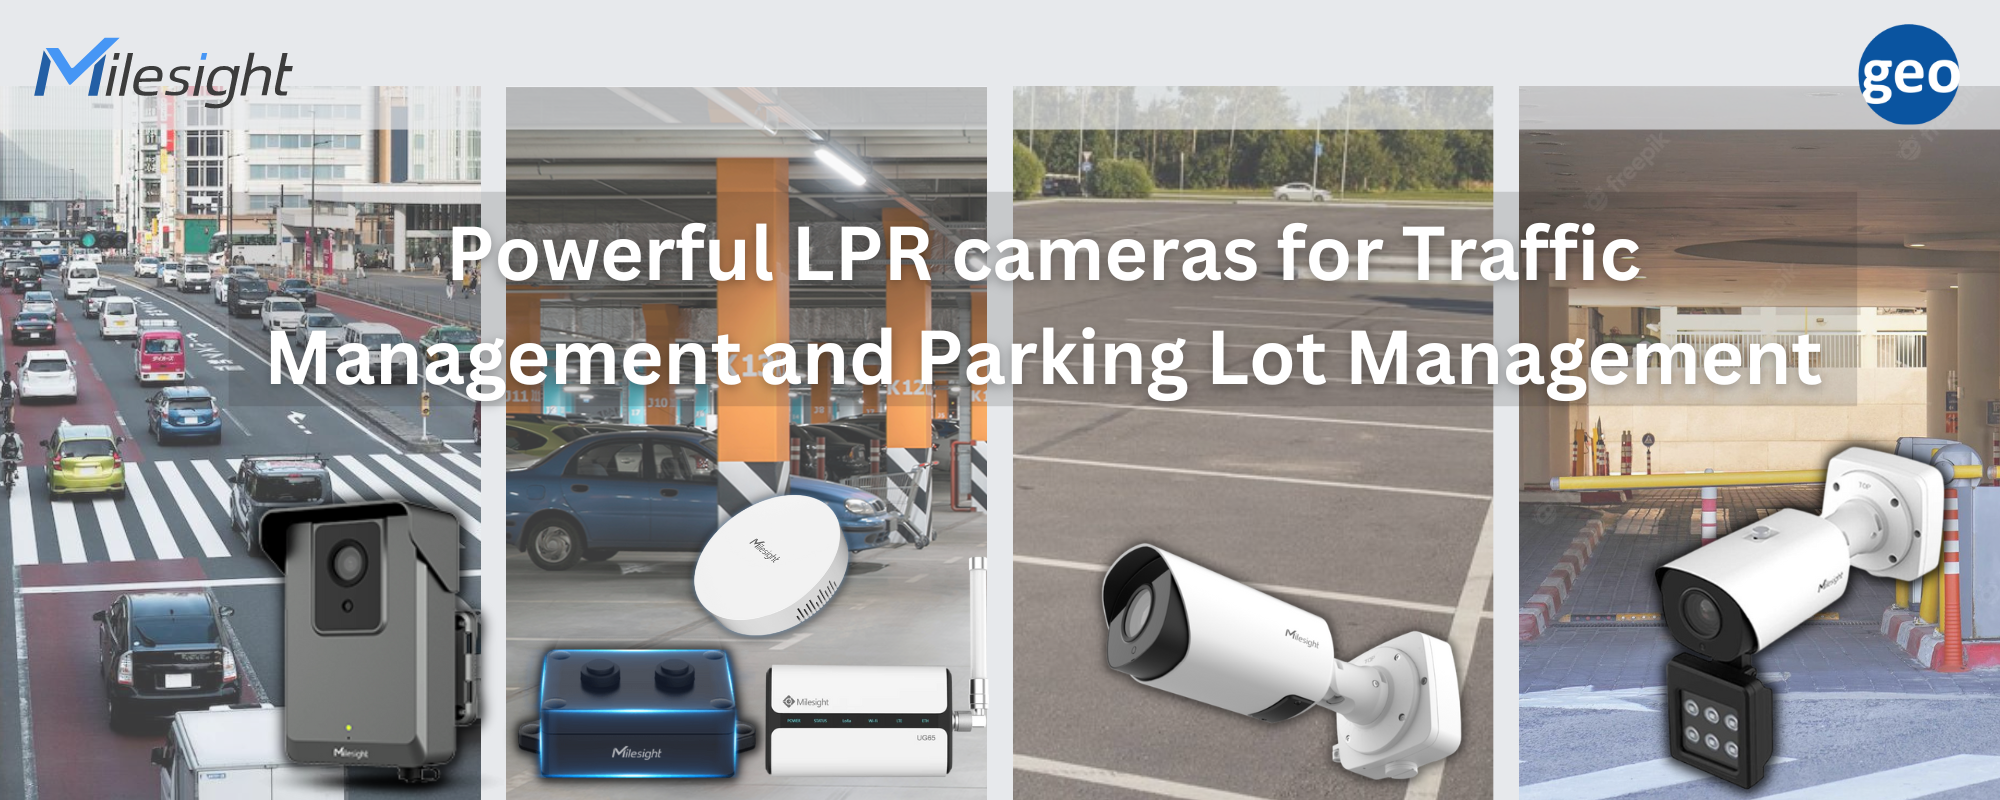 Milesight: Powerful LPR Cameras for Traffic Management and Parking Lot Management